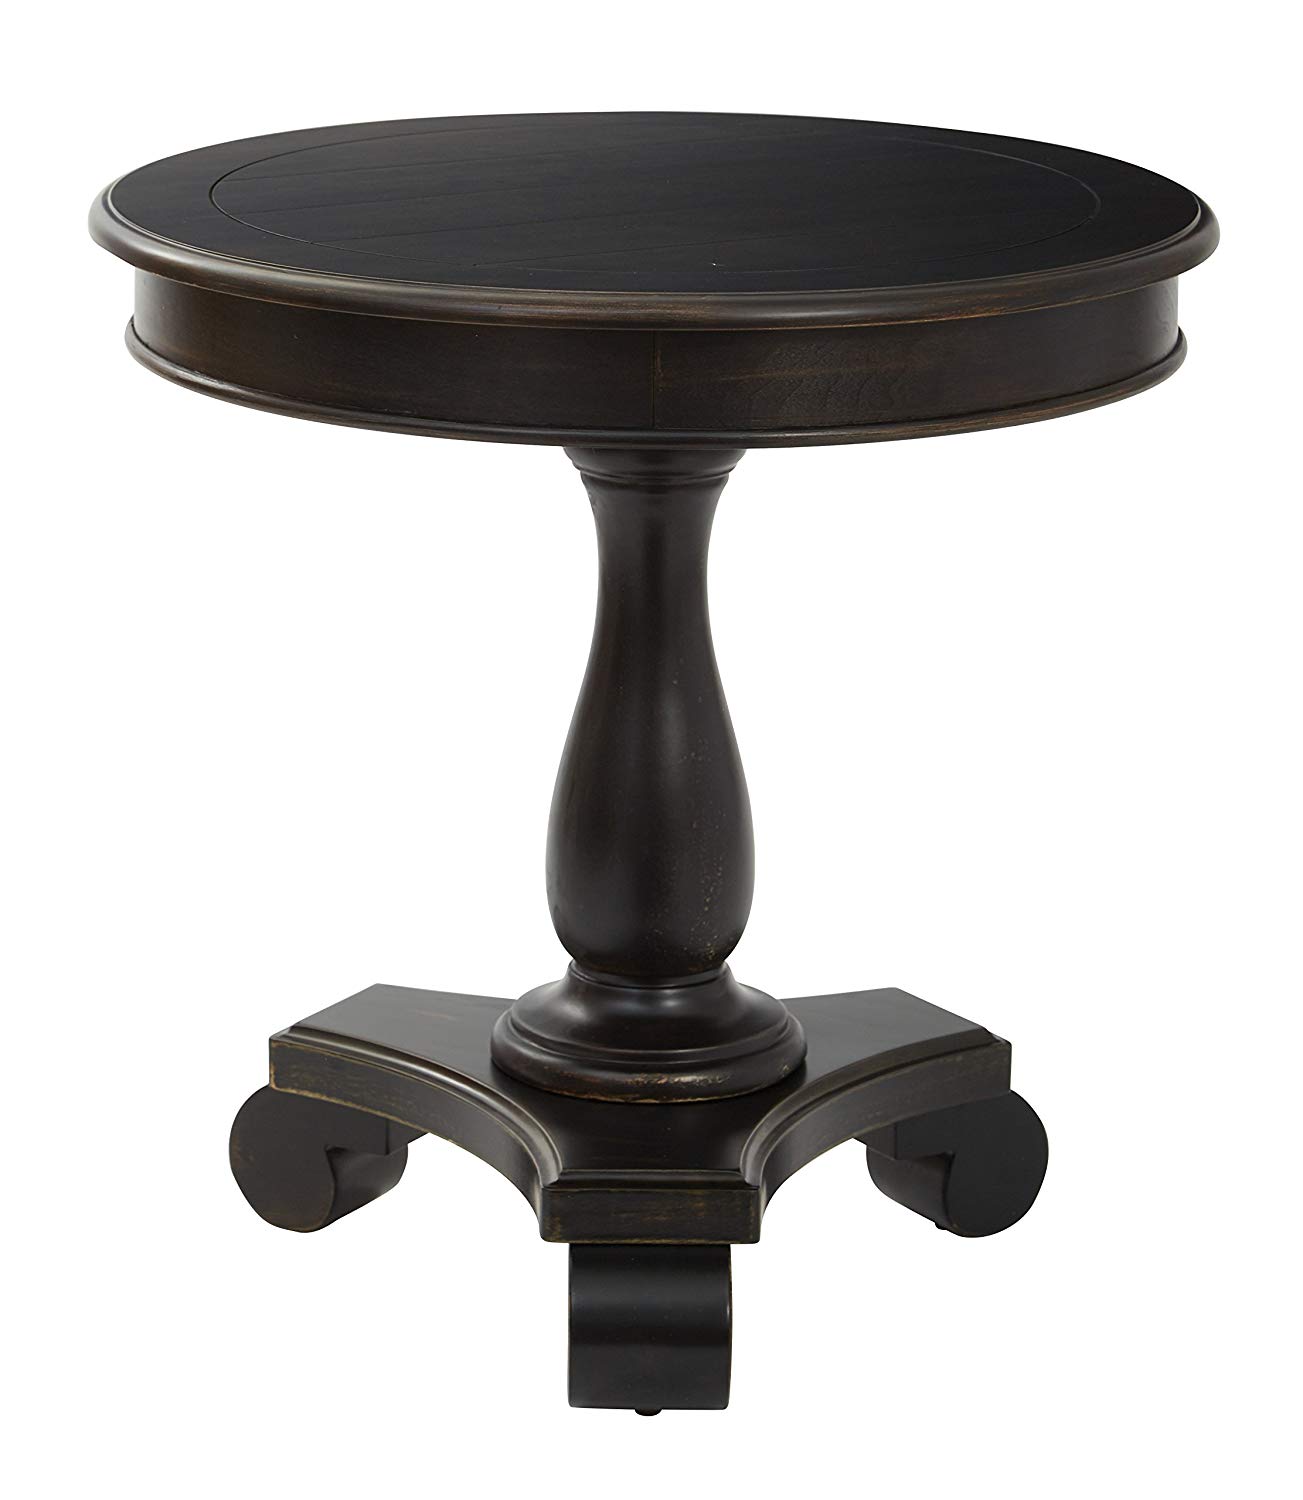 inspired bassett avlat osp avalon round black pedestal accent table antique kitchen dining vintage ethan allen coffee with wicker drawers small pine marble look fire weathered